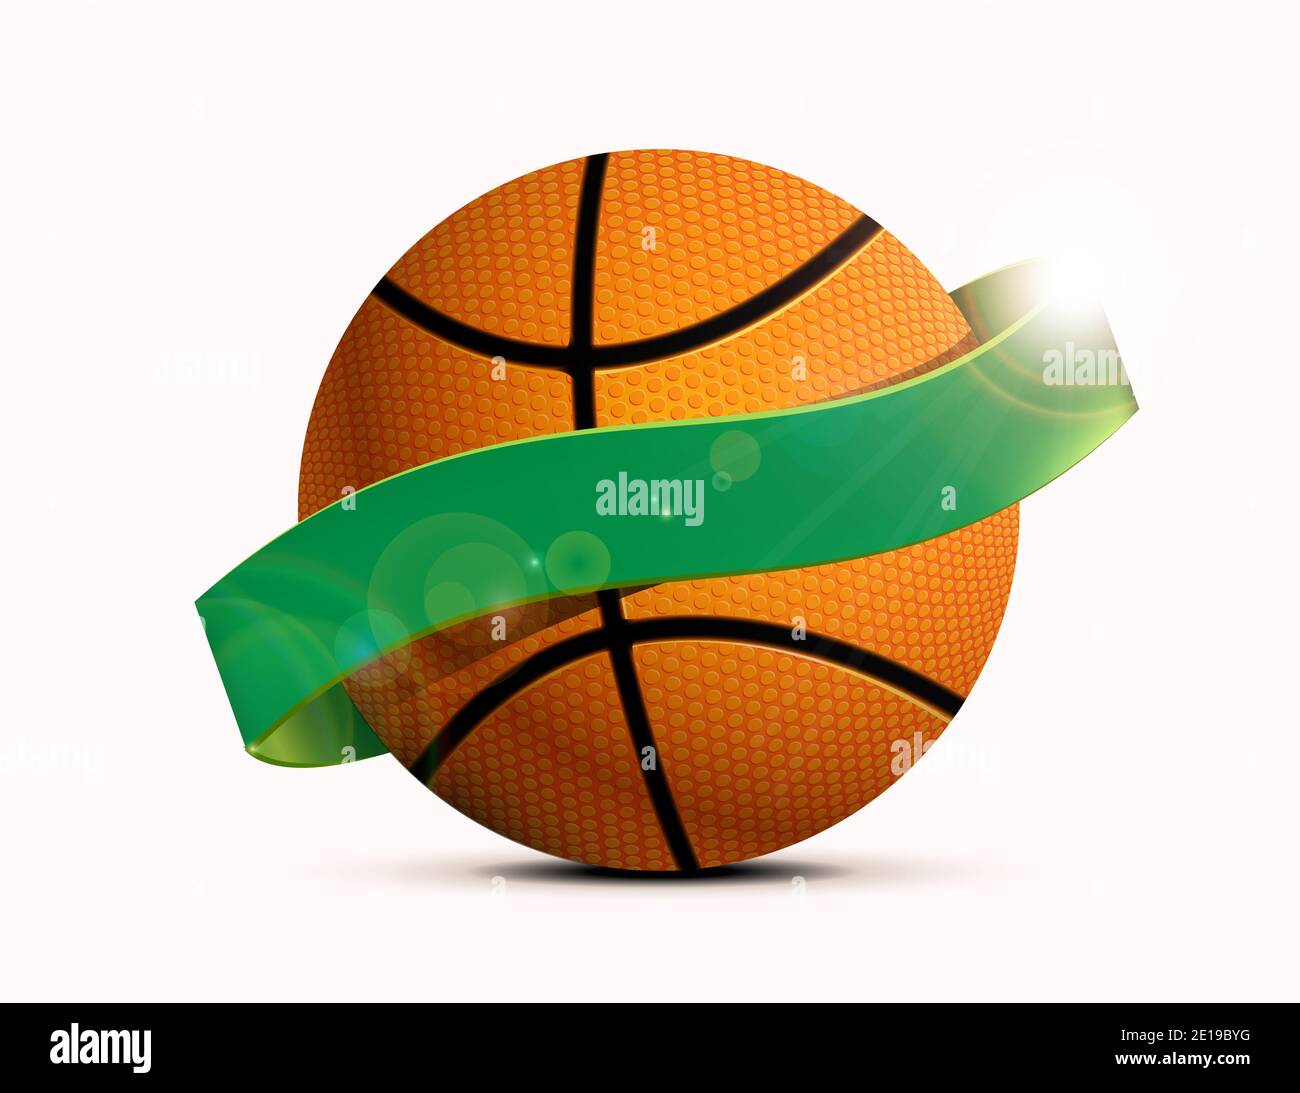 Basketball party with a basketball ball. illustration, can be used as flyer, poster, invitation Stock Photo